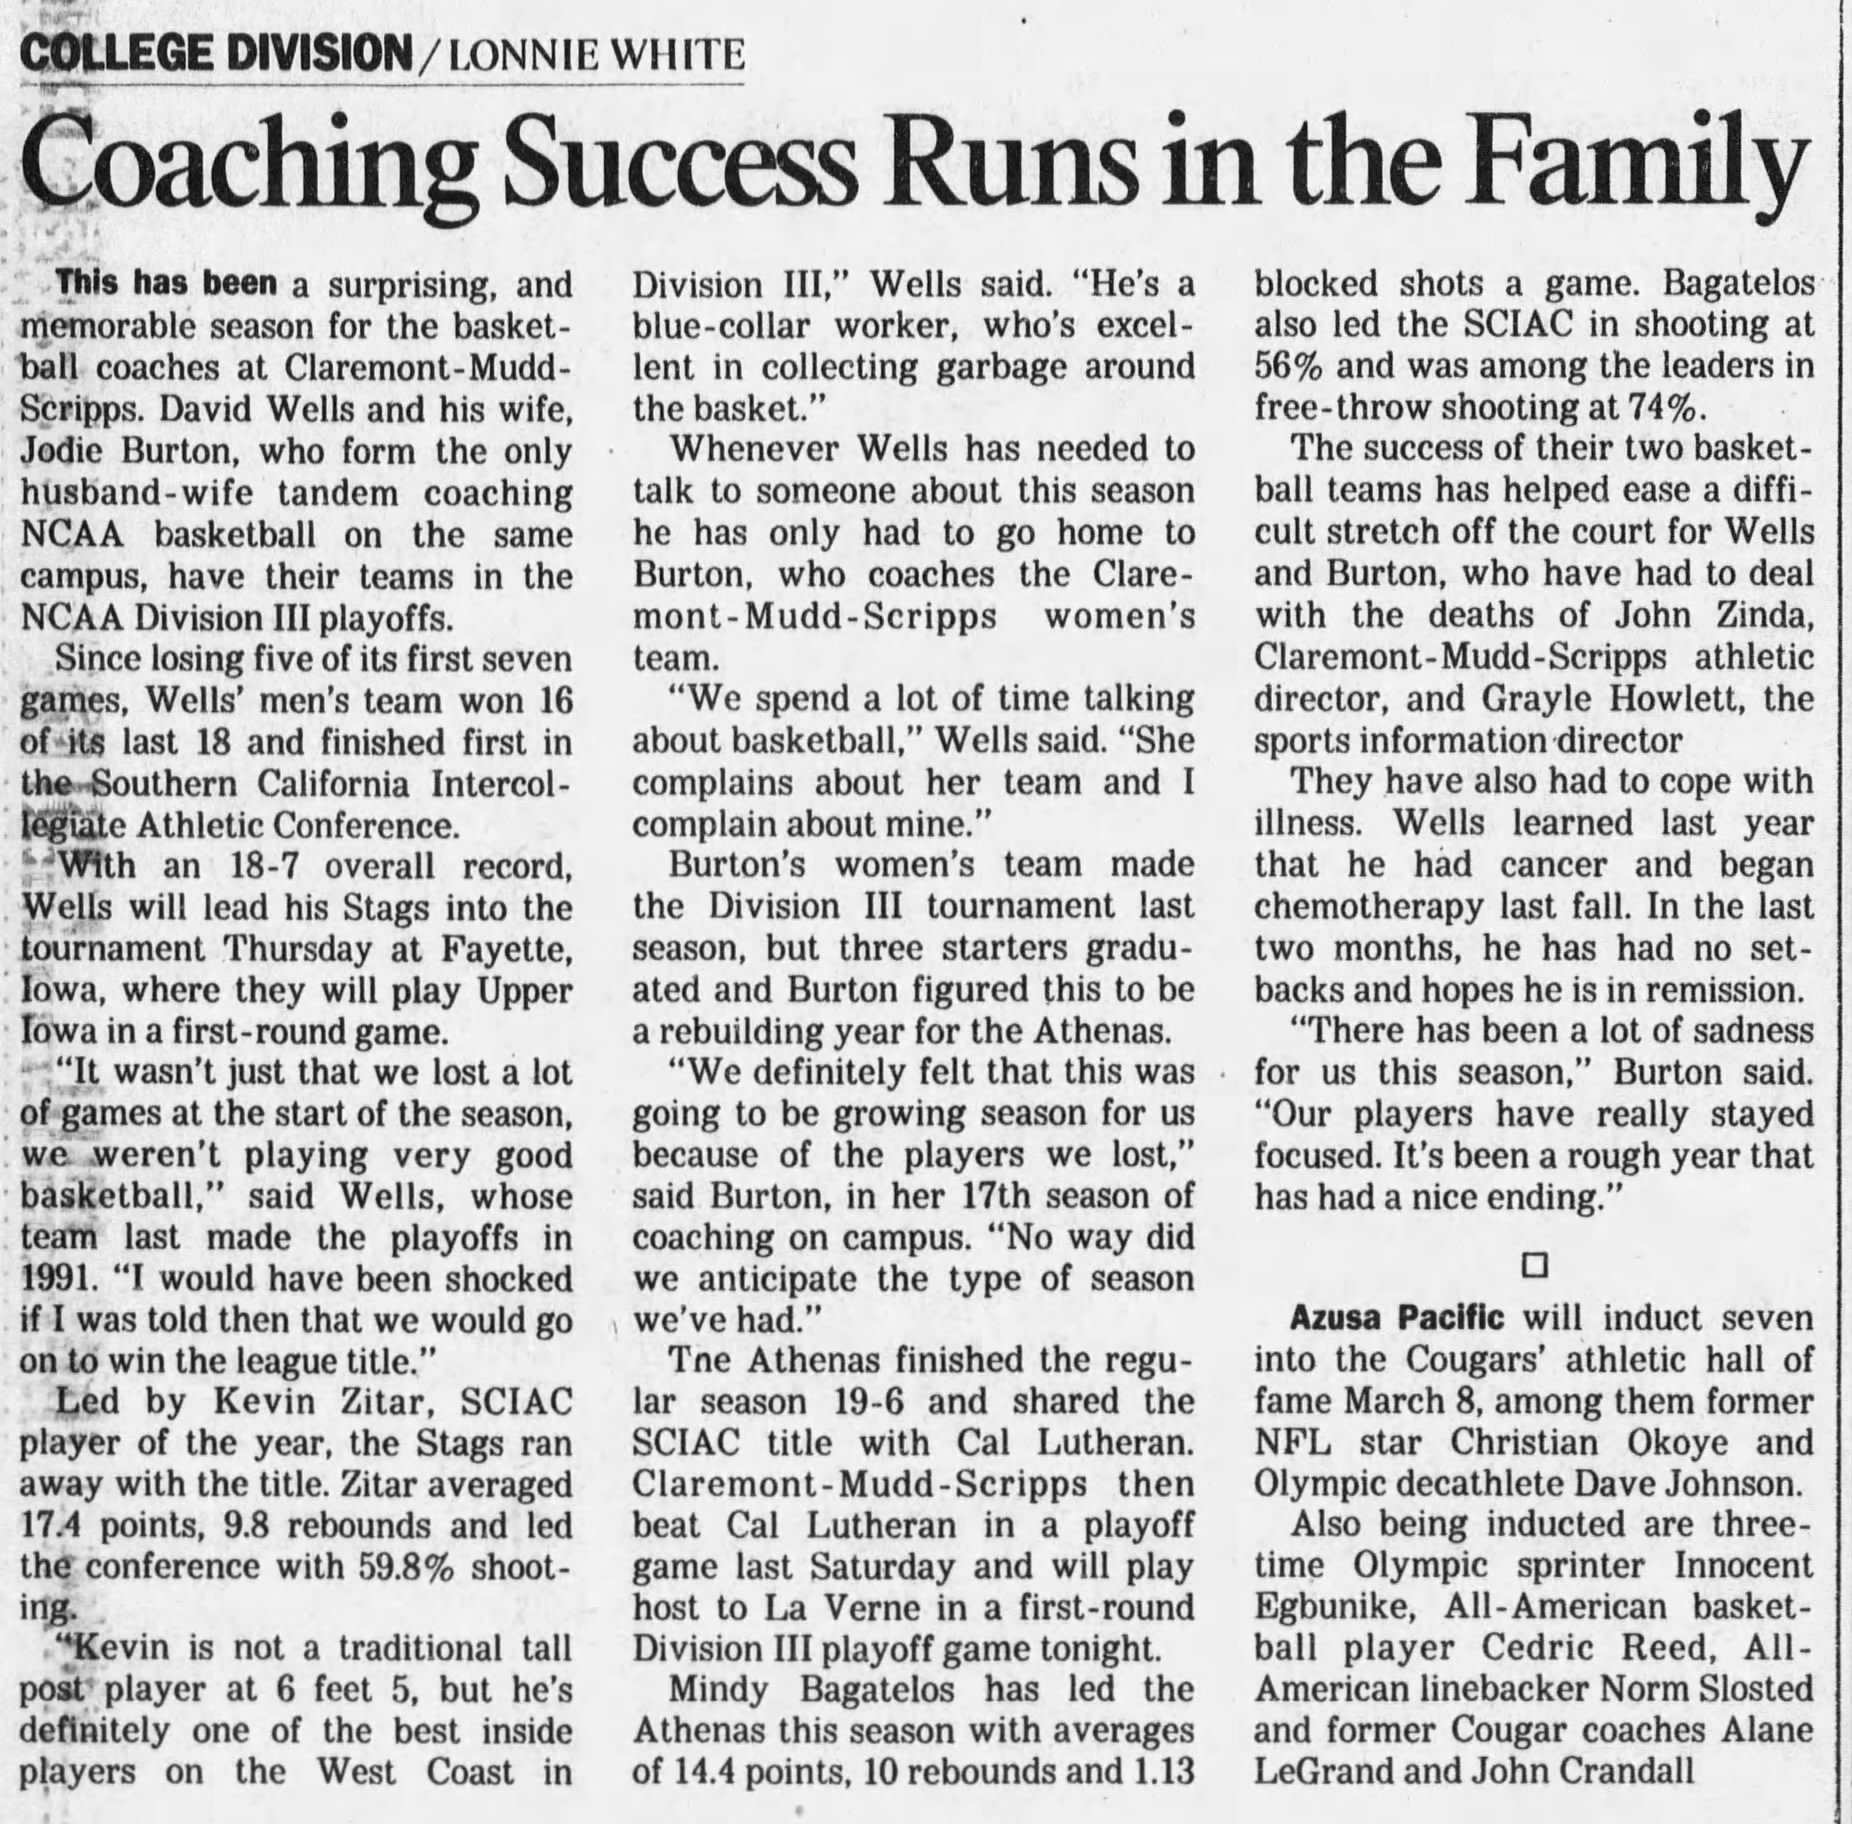 LA Times article with headline Coaching Success Runs in the Family (article posted for decorative purposes)